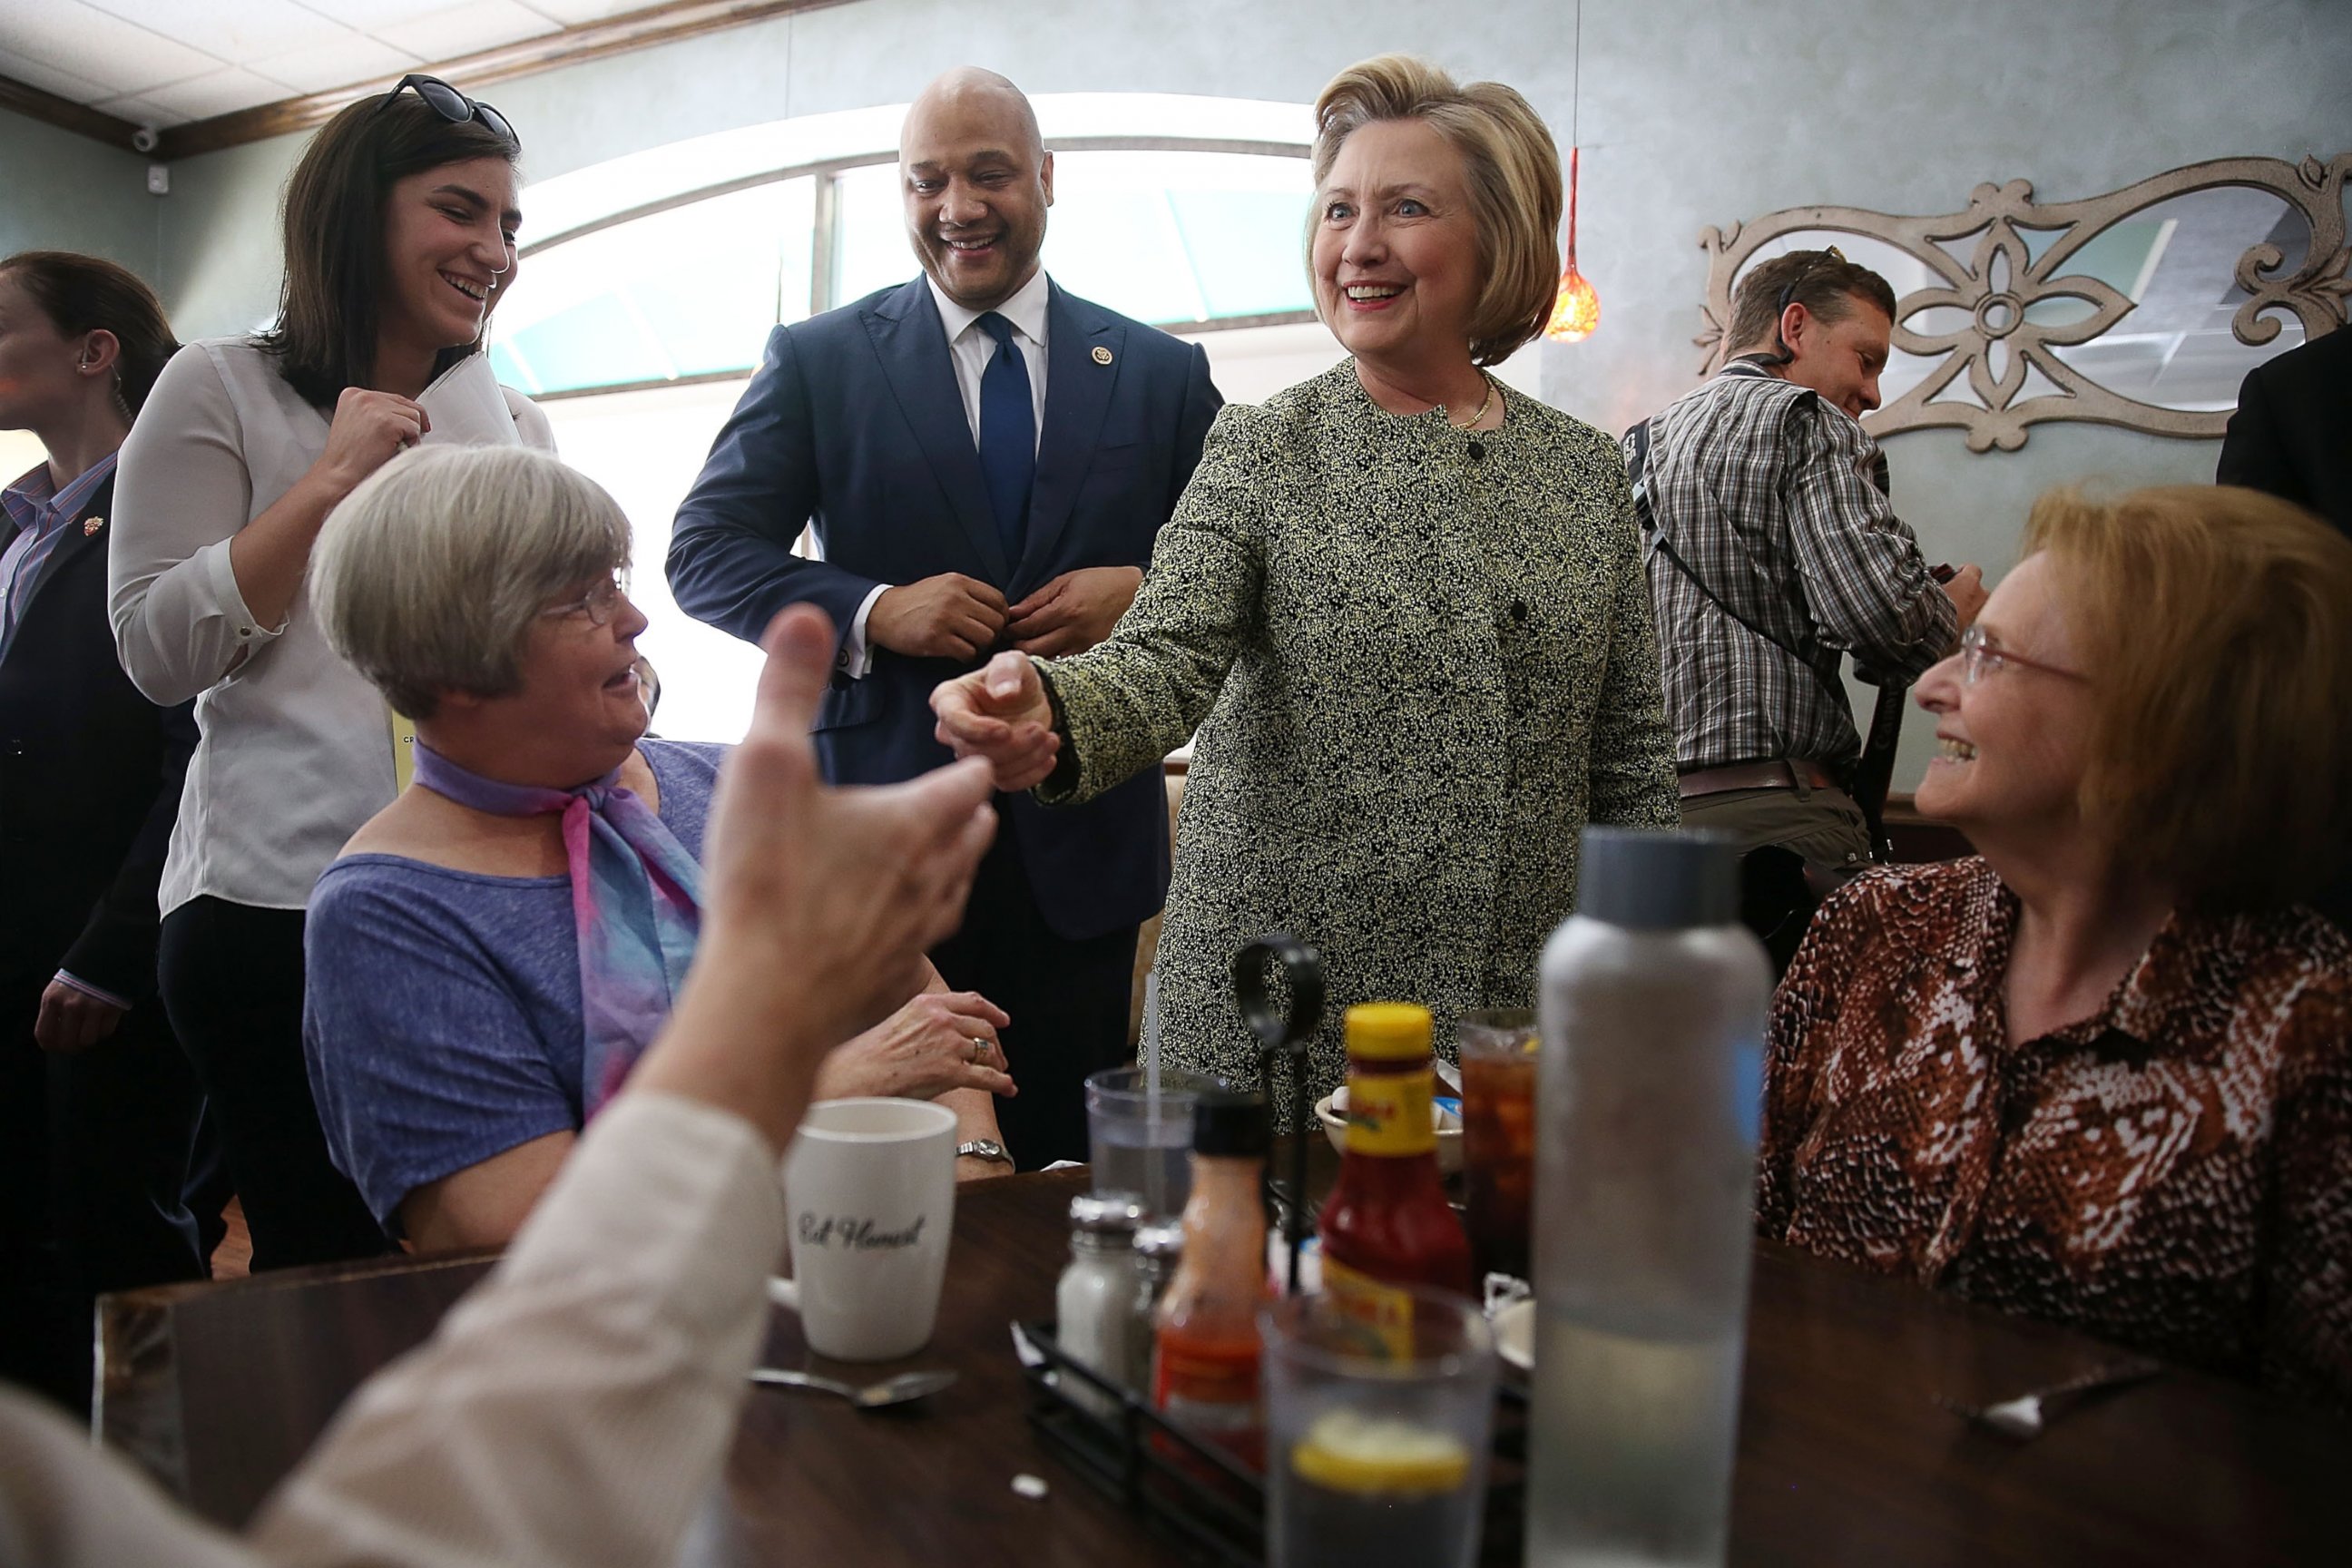 PHOTO: Presidential candidate Hillary Clinton greets people at the Lincoln Square pancake house as she campaign for votes on May 1, 2016 in Indianapolis.